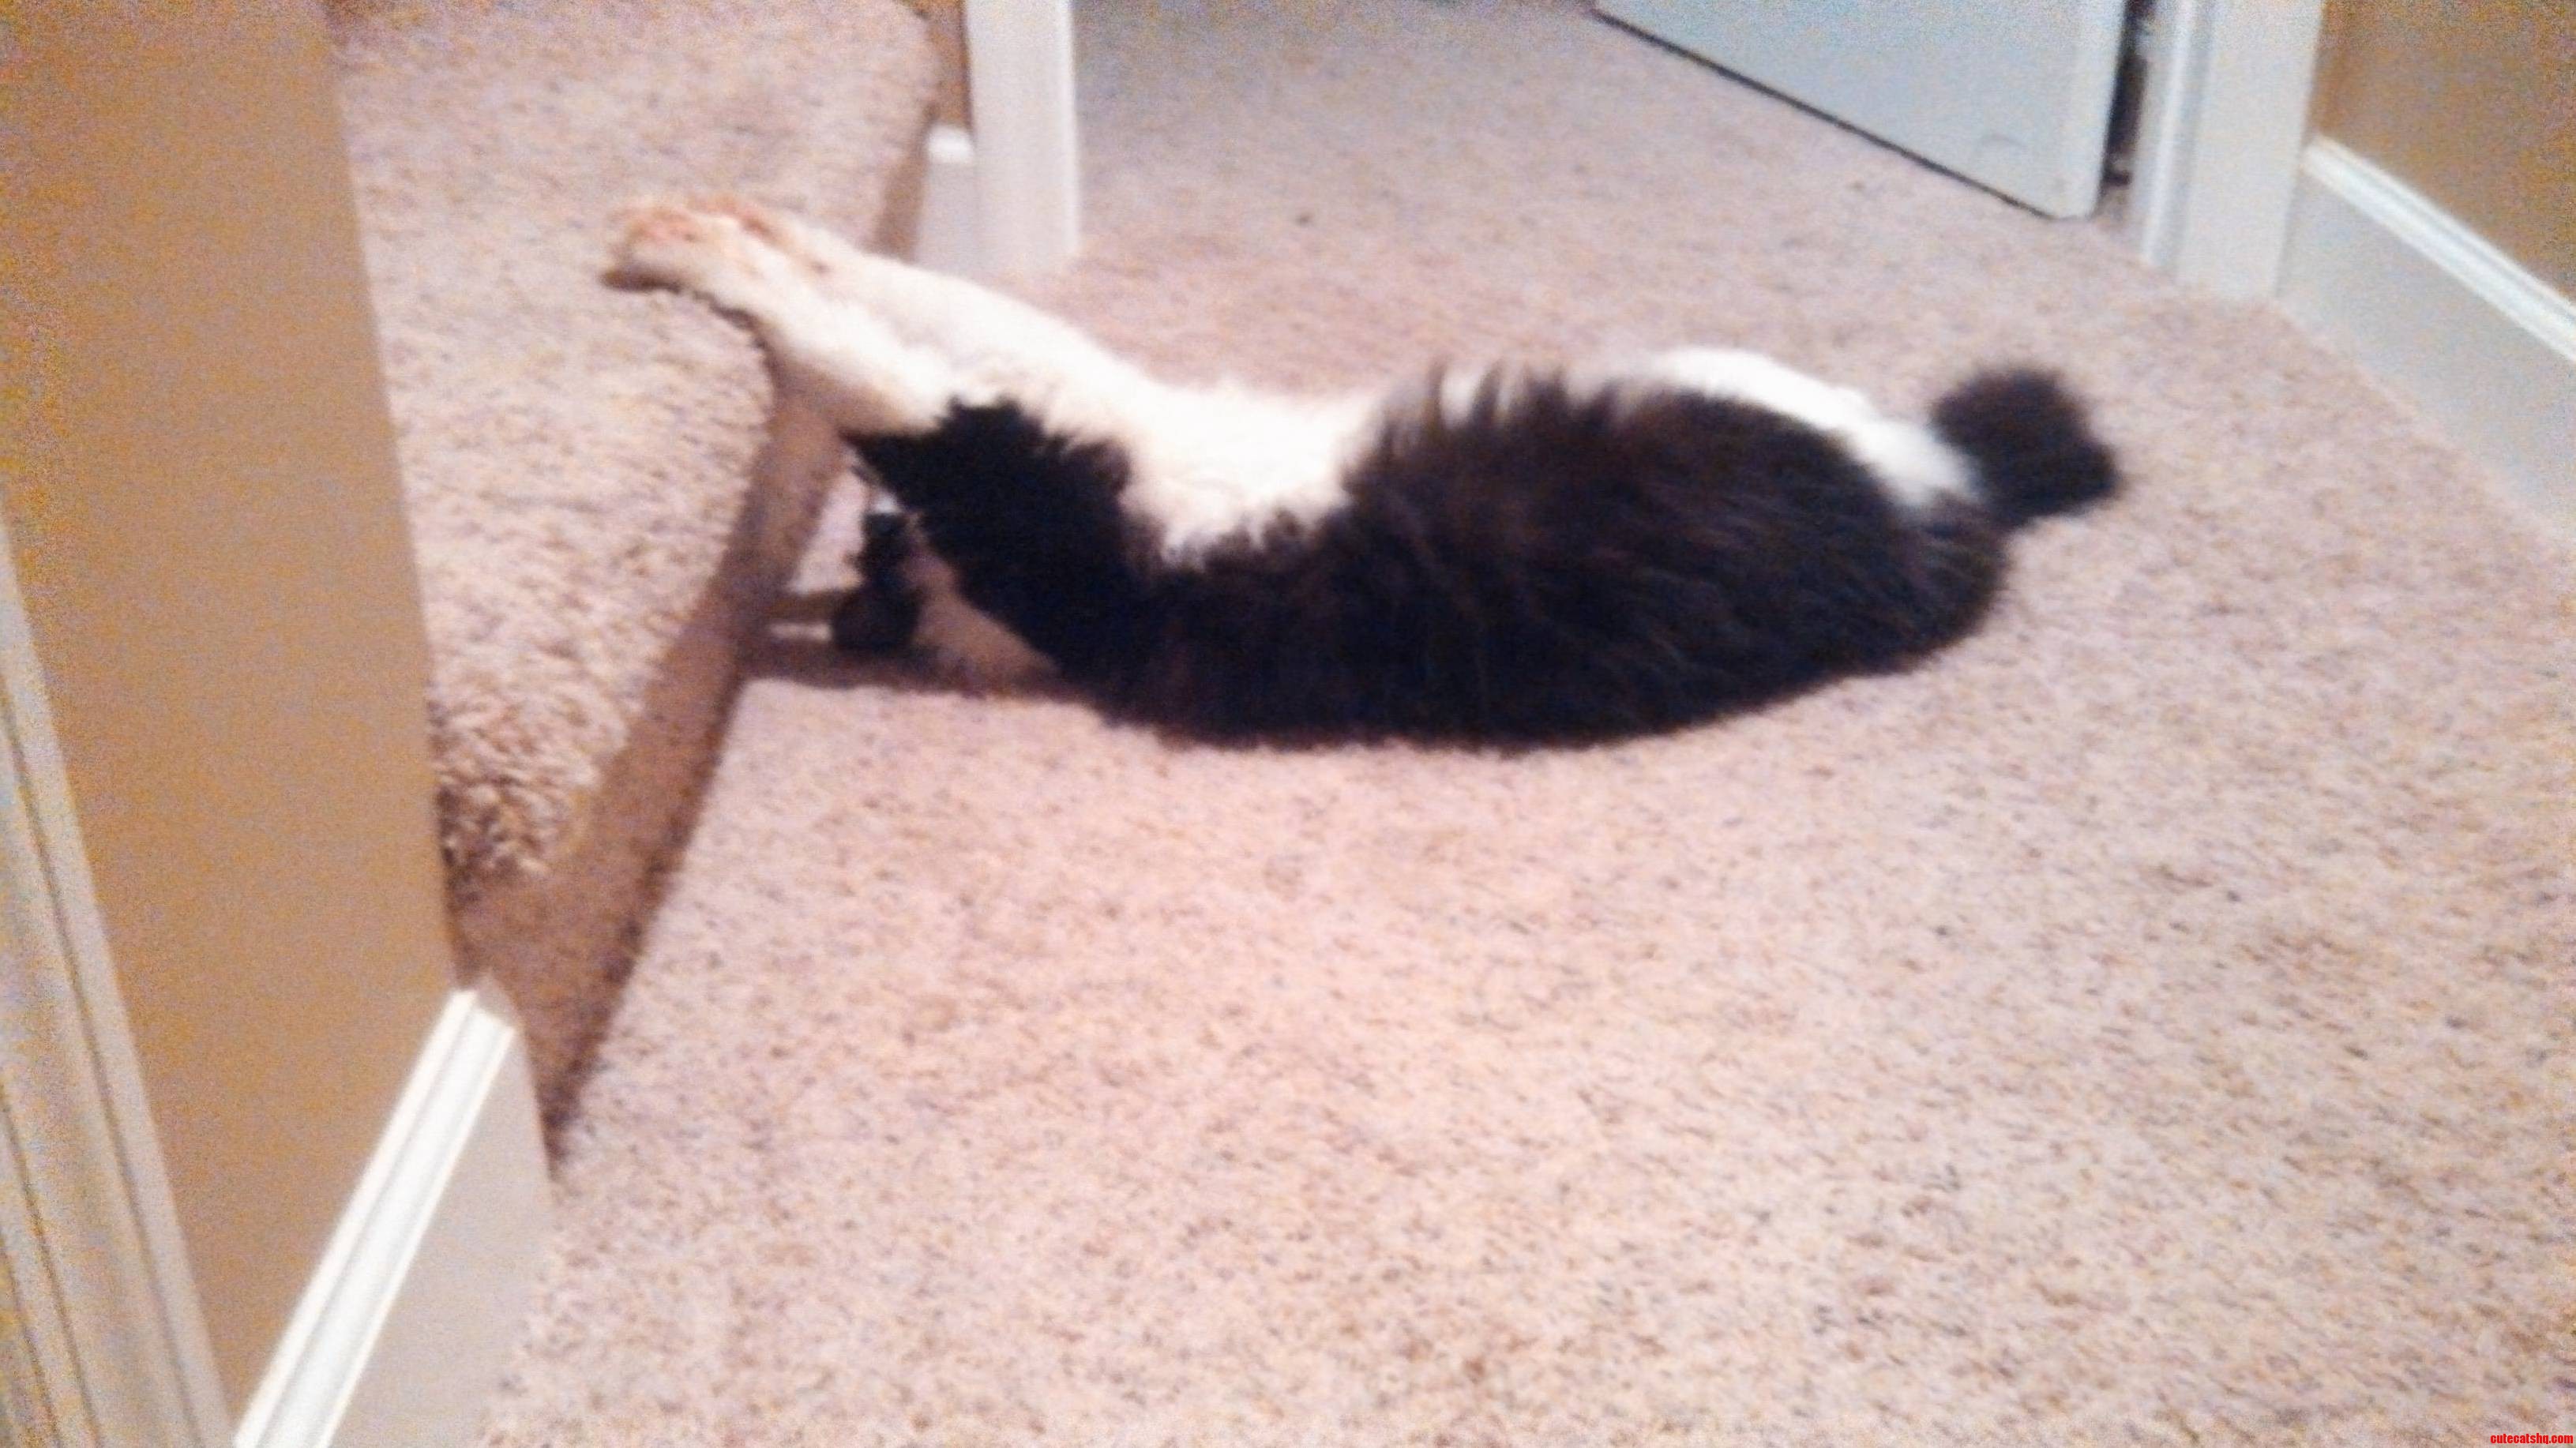 Not Sure How A Cat Falls Asleep Like This..